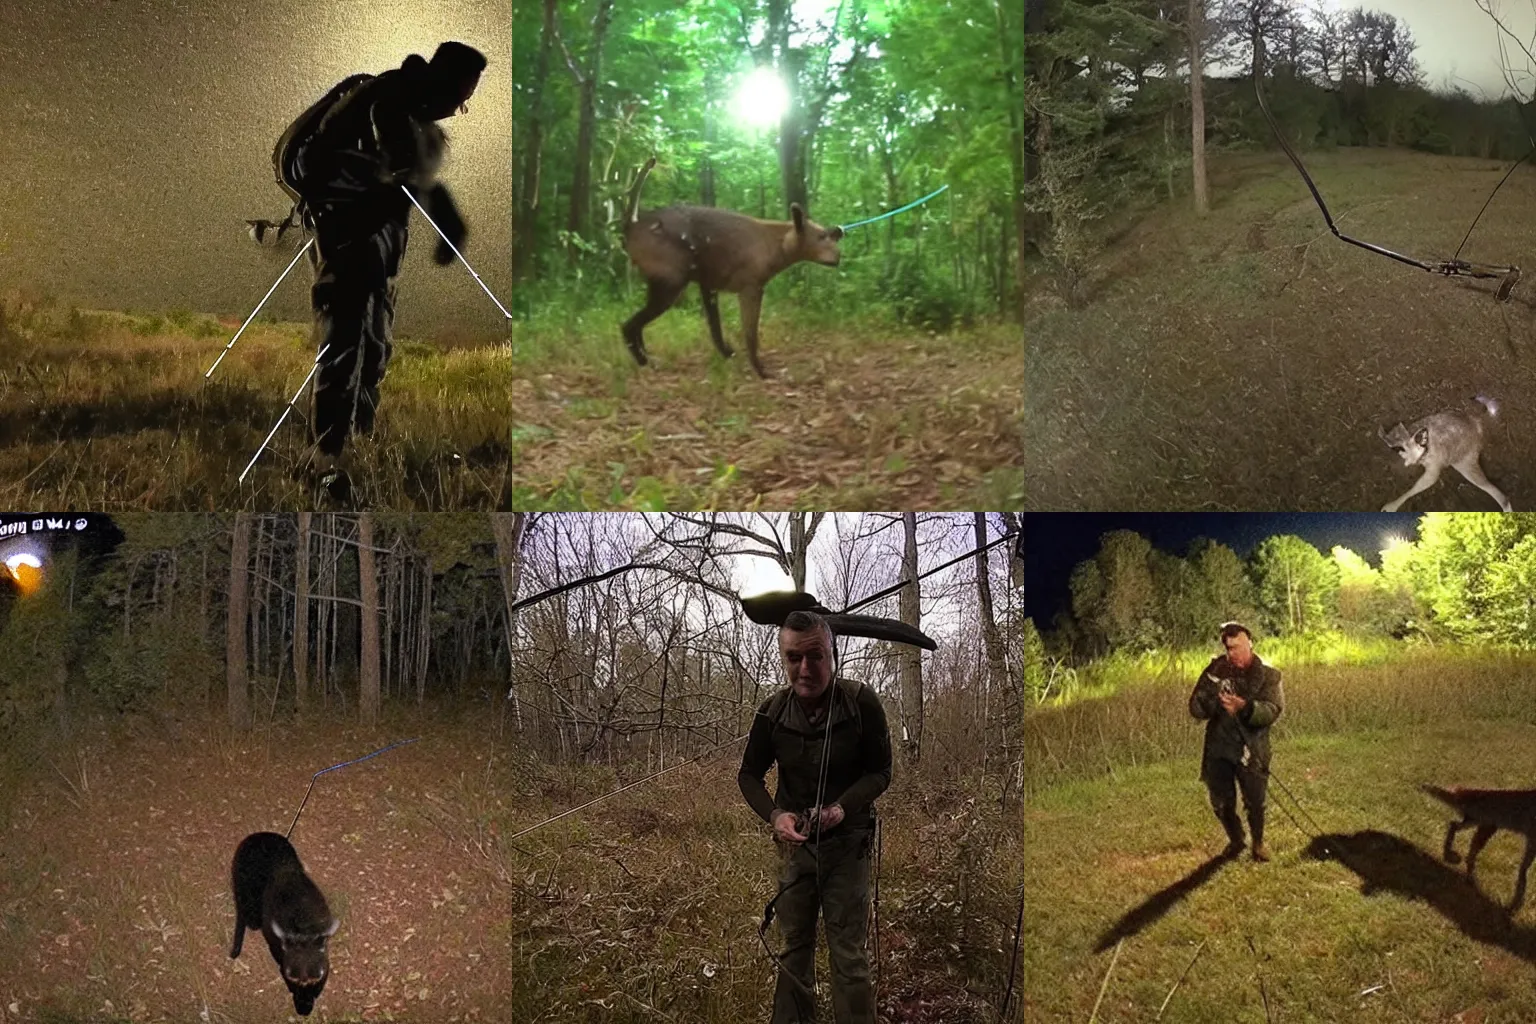 Prompt: trailcam footage of morrissey hunting an animal at night with a bow